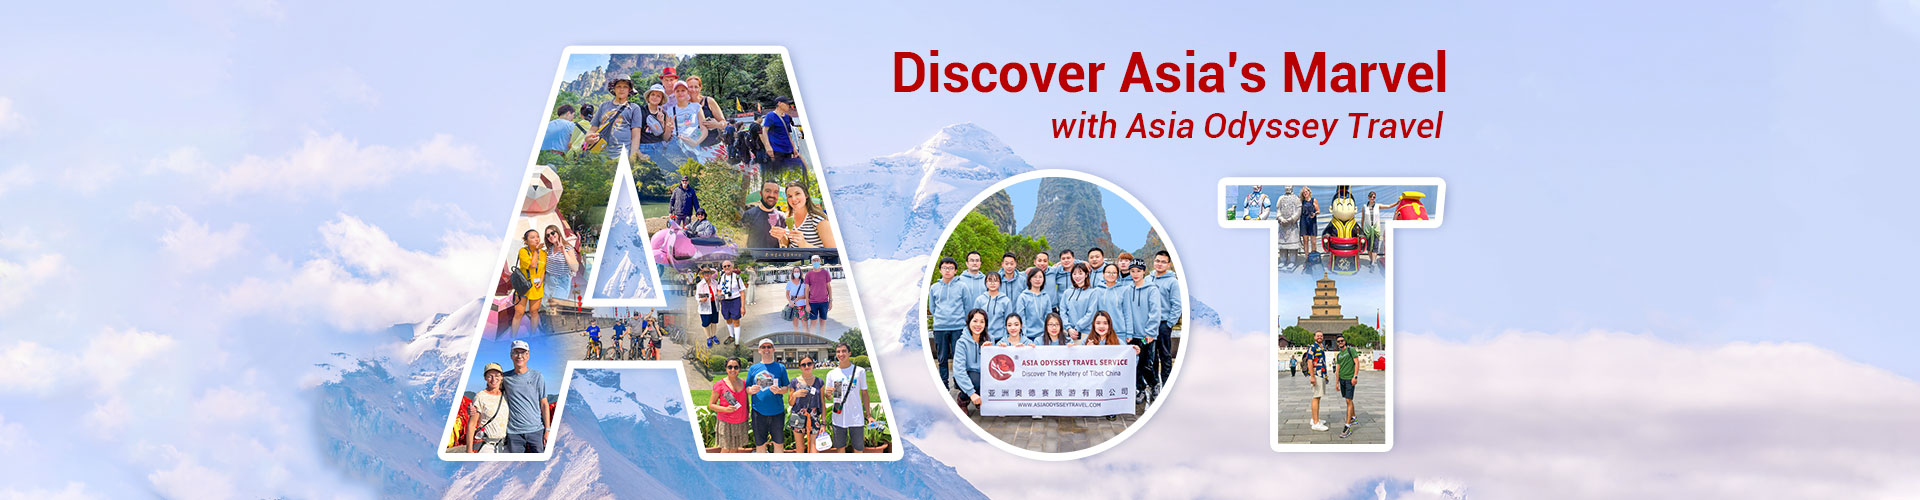 Payment Guide at Asia Odyssey Travel